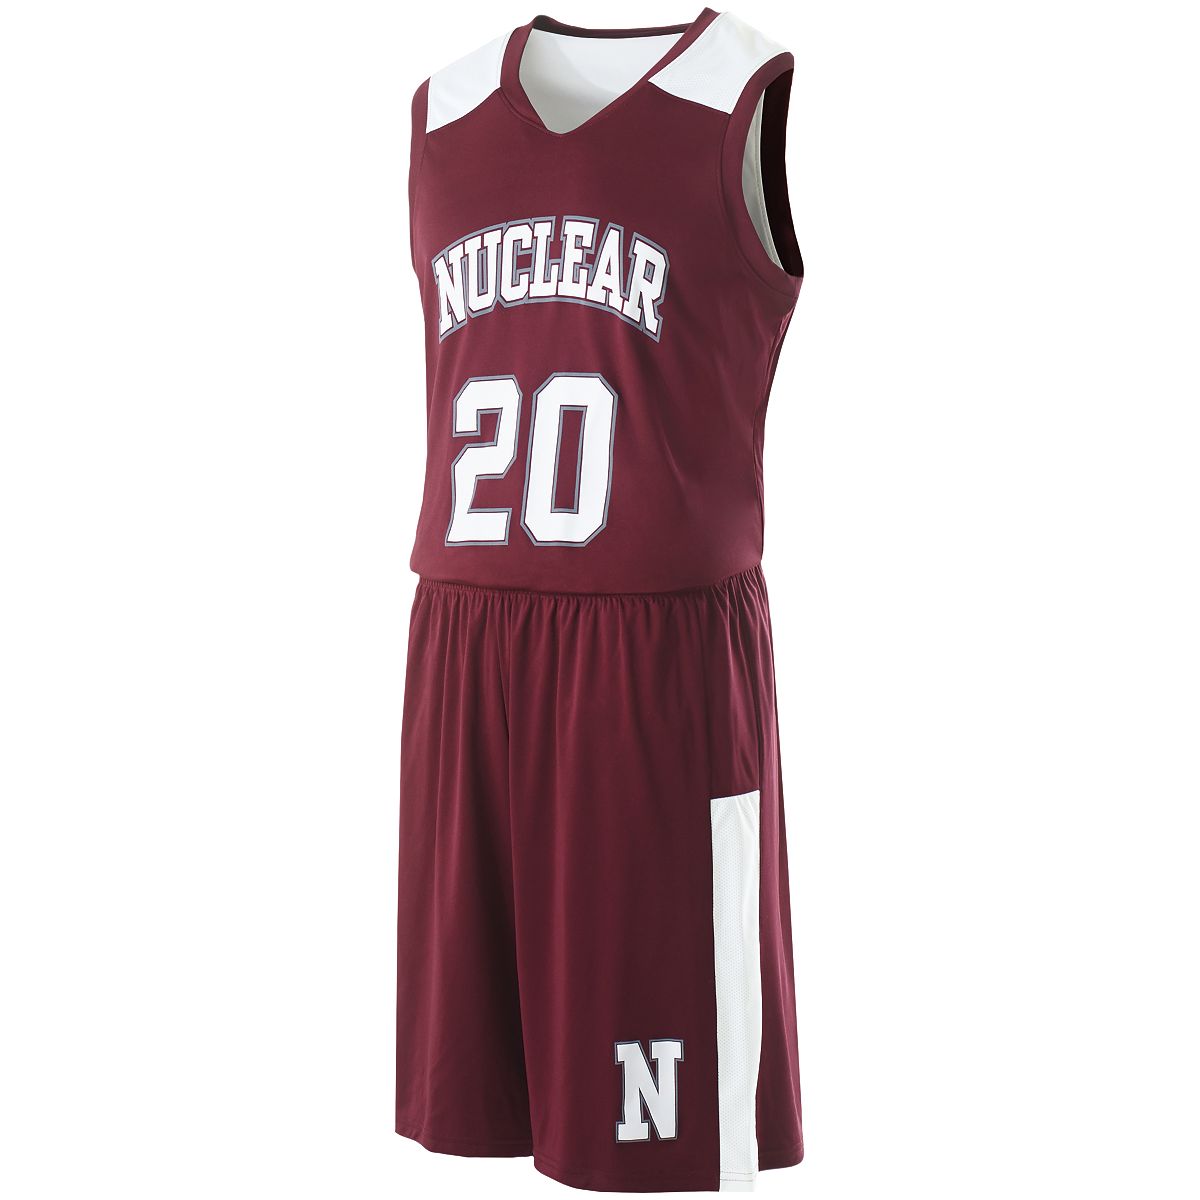 Youth Reversible Nuclear Jersey